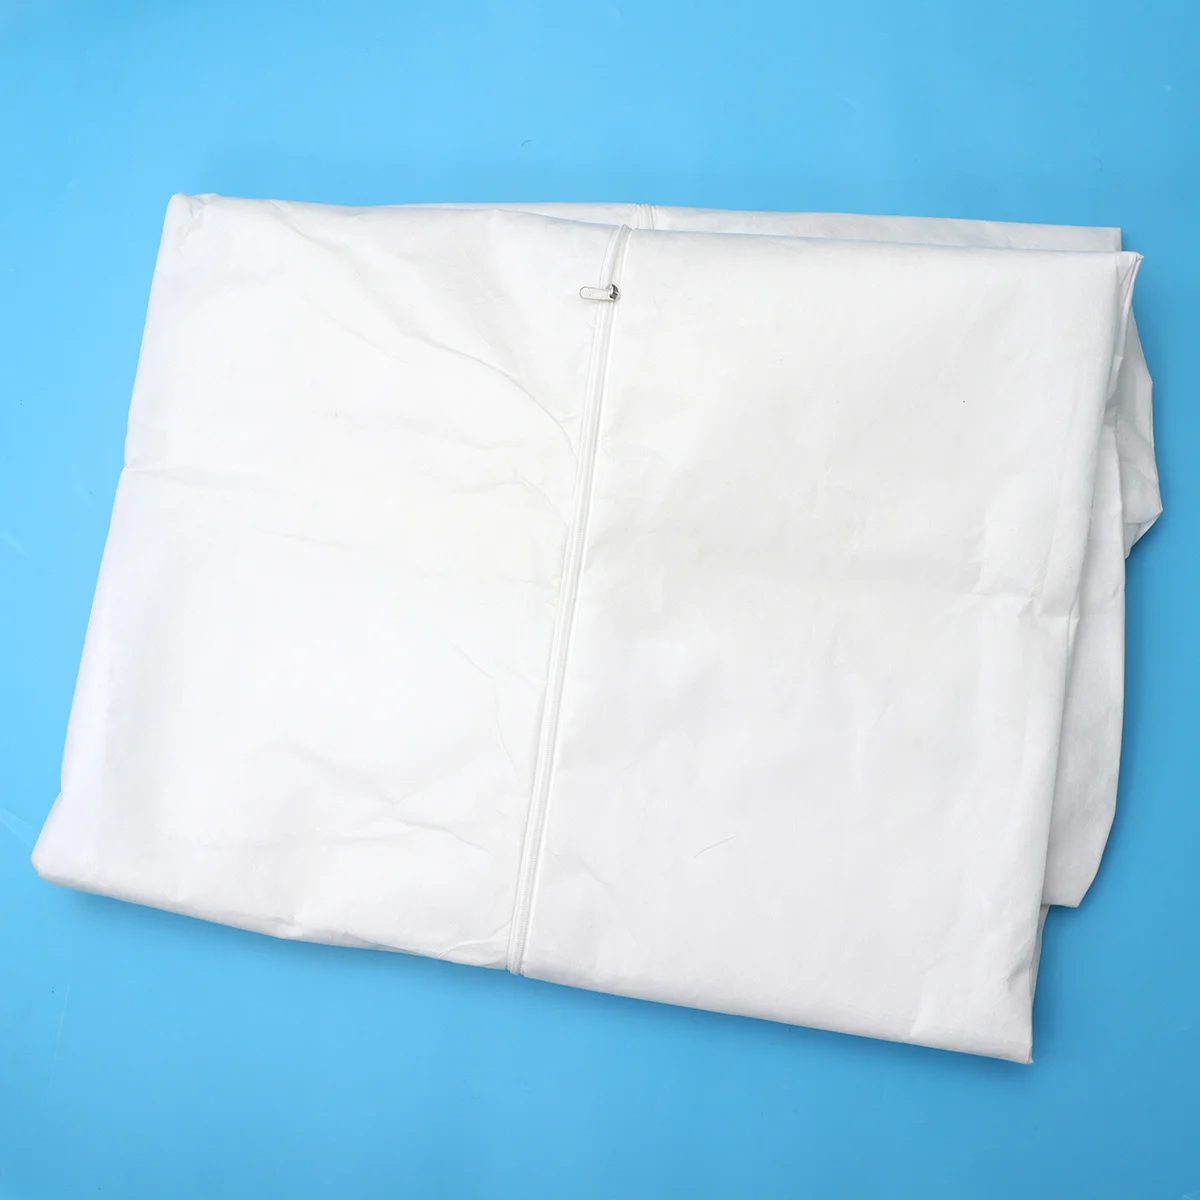 

1Pc Cadaver Bag Antiseptic Body Storage Bag Fungi-proofing Zipper Corpse Bag Portable Corpse Pouch Funeral Accessory (White)